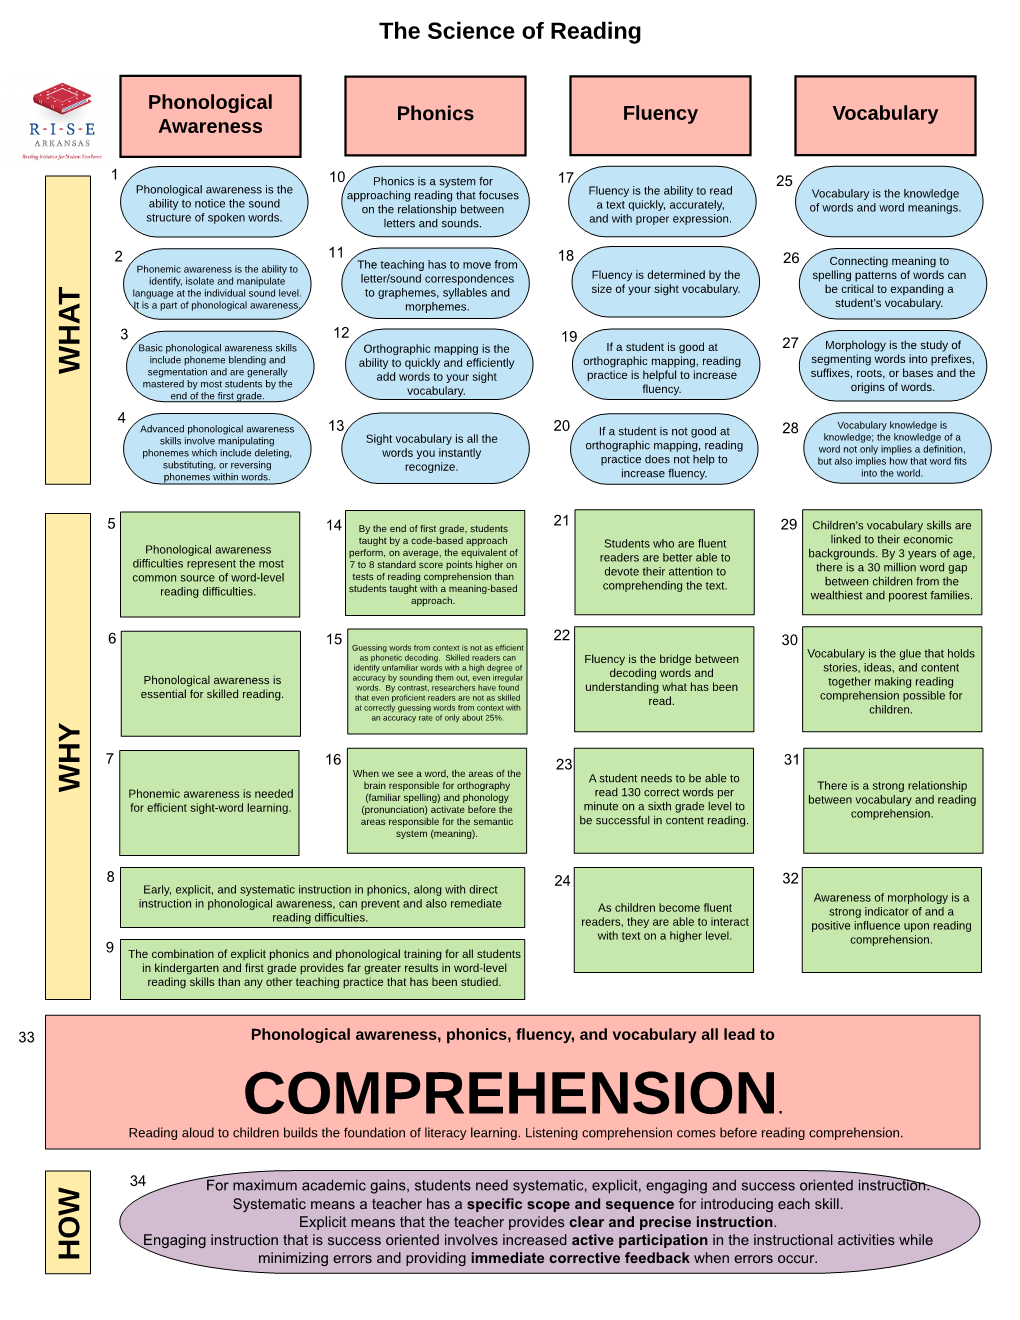 Comprehension. Areas Responsible for the Semantic Be Successful in Content Reading